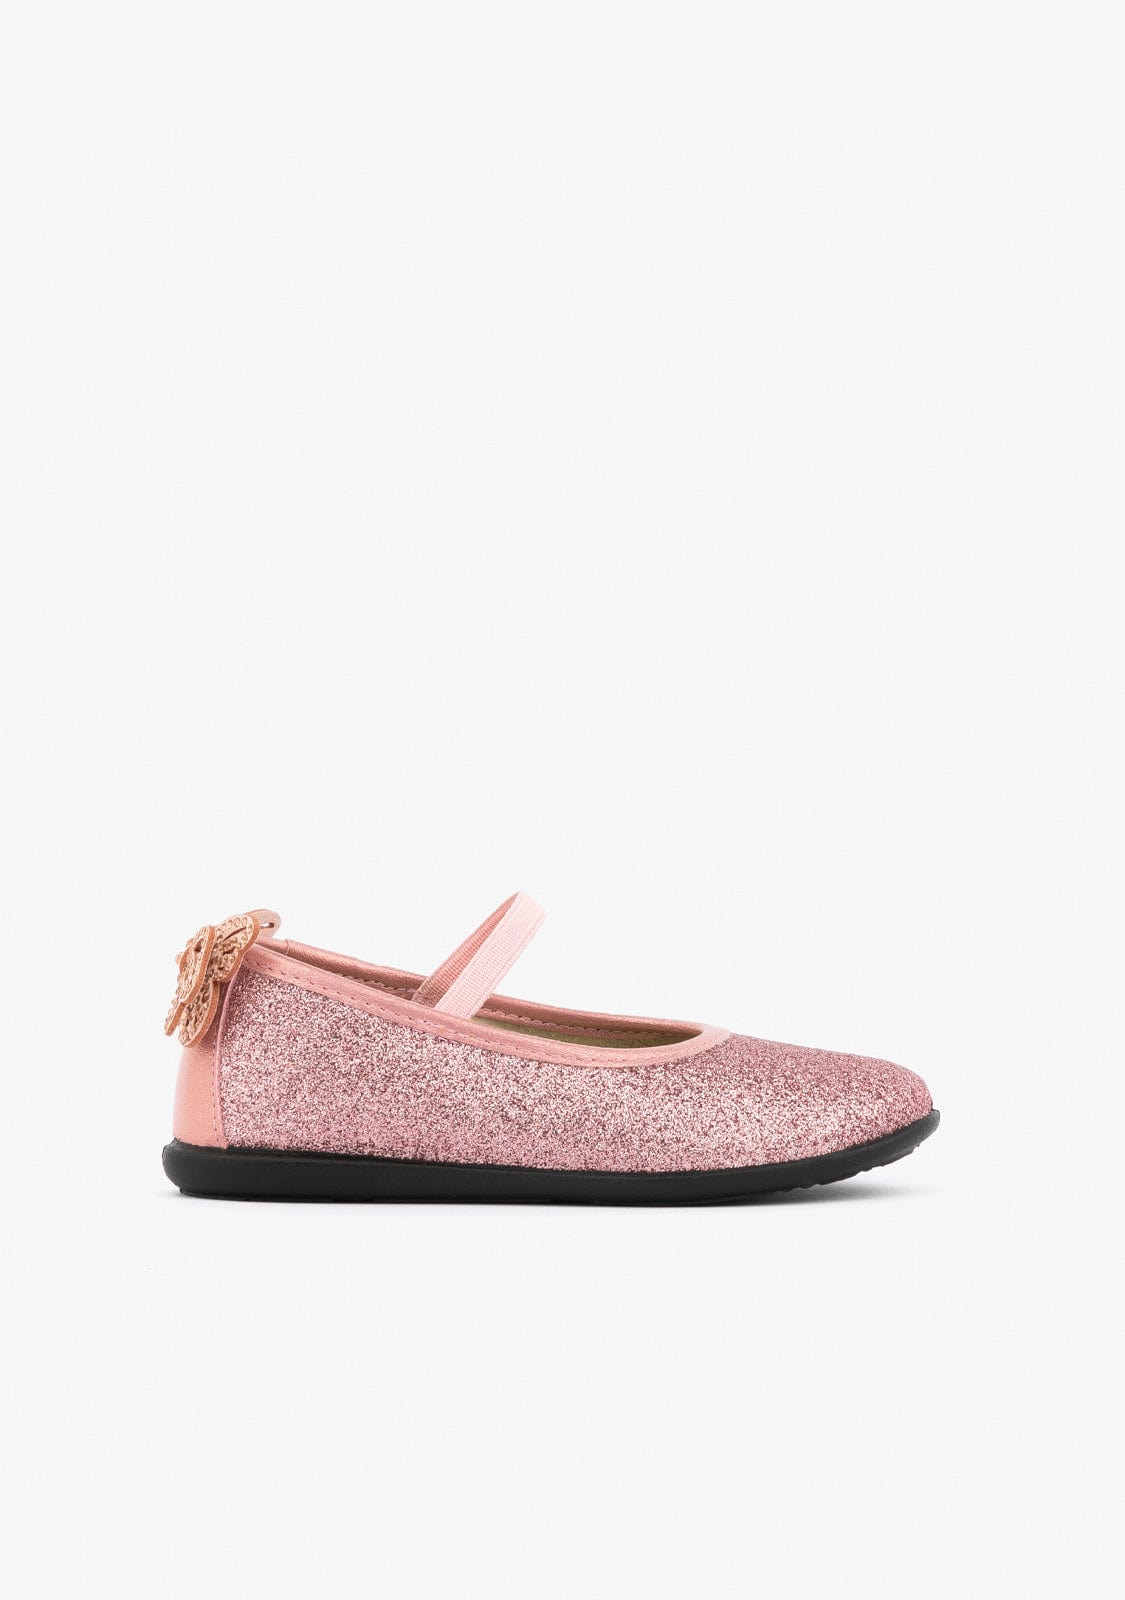 CONGUITOS Shoes Girl's Pink Glitter Ballerinas With Bow